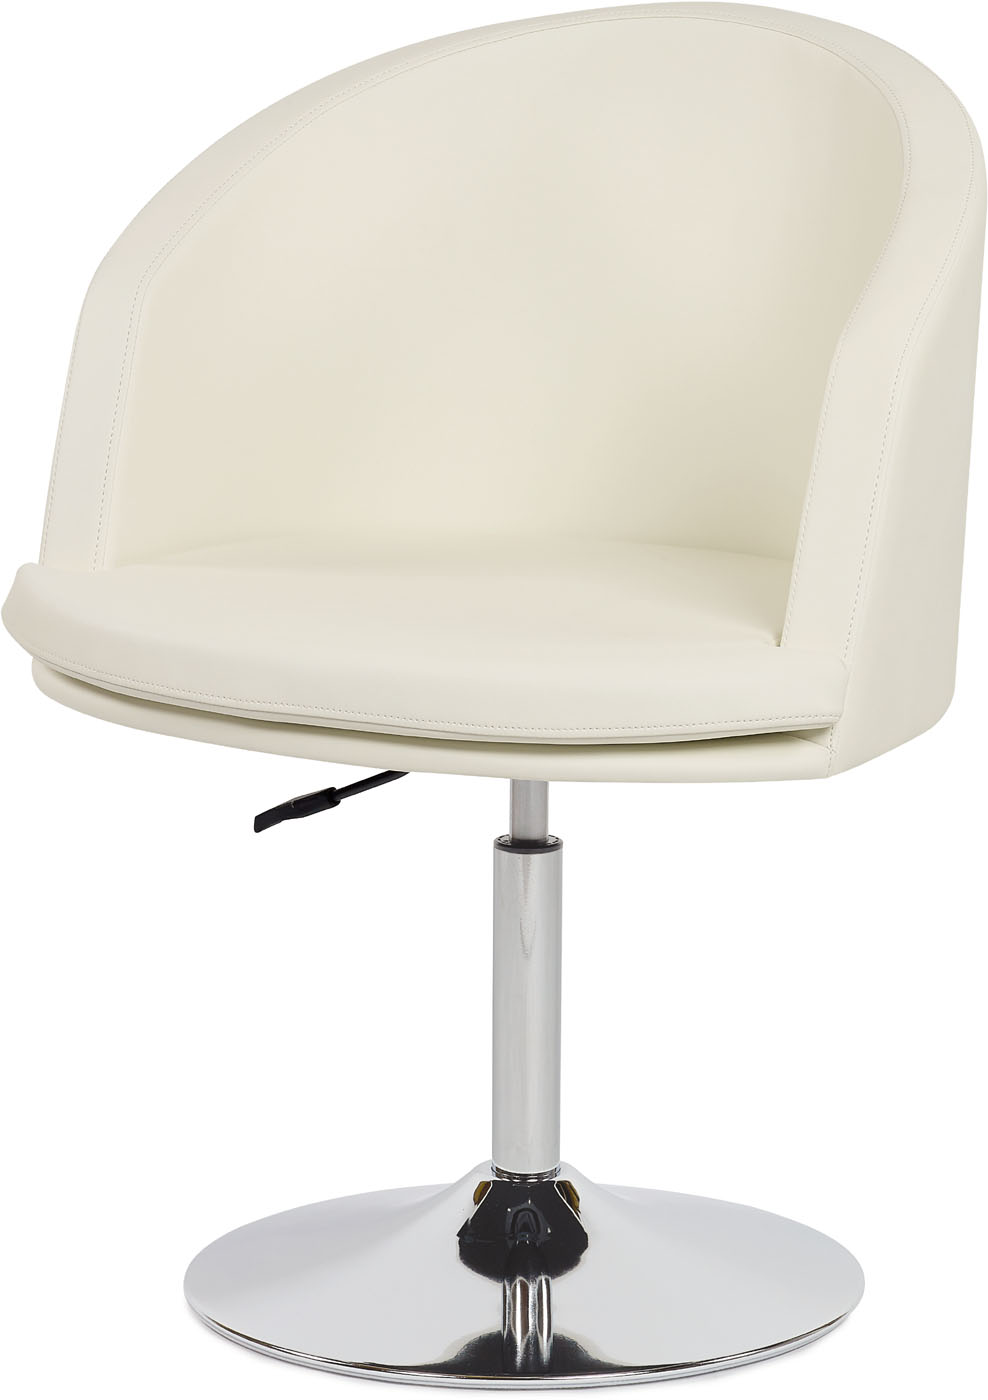  Sibel Isaline Fauteuil / Base Pied Rond 